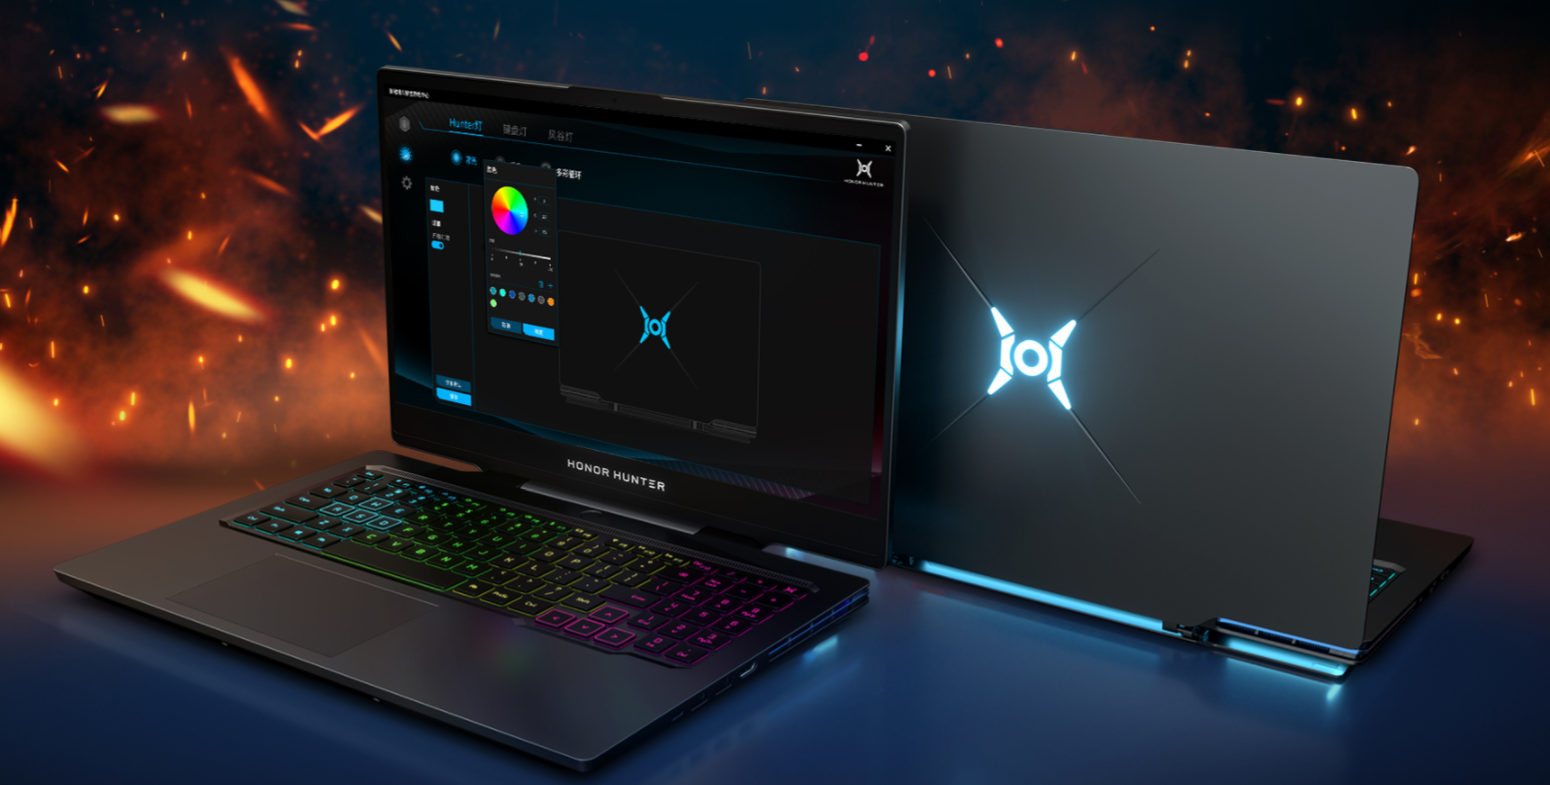 Honor Hunter V700 Gaming Laptops launched, features NVIDIA RTX 2060 and 10th Gen Intel i7